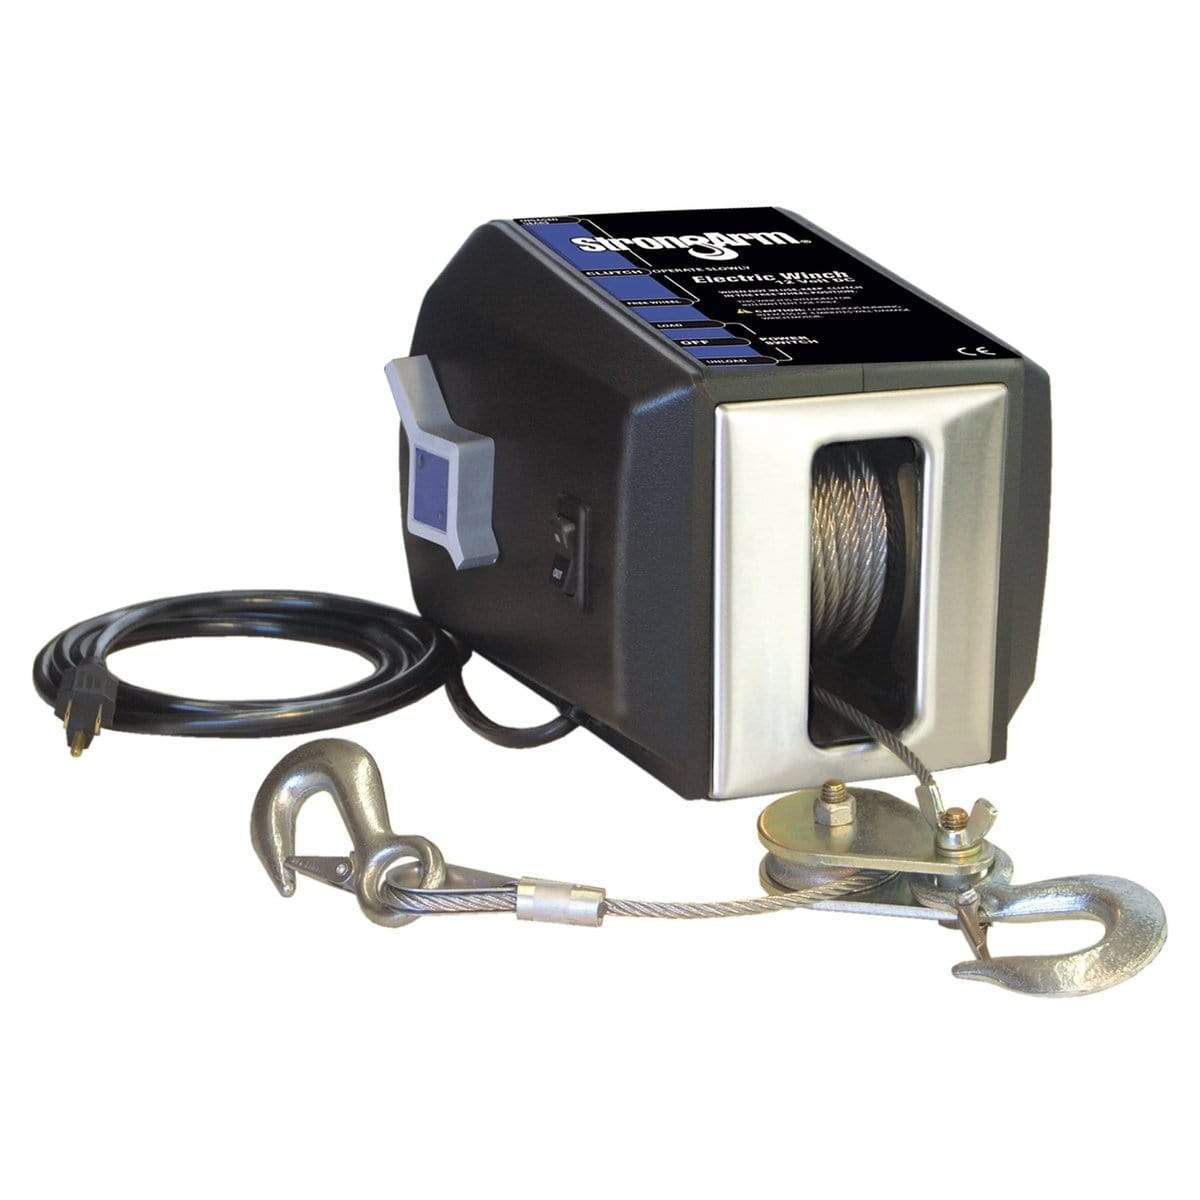 Dutton-Lainson Not Qualified for Free Shipping Dutton-Lainson Strongarm SA-Series 120v Winch SA12000AC 4000 lb #24876